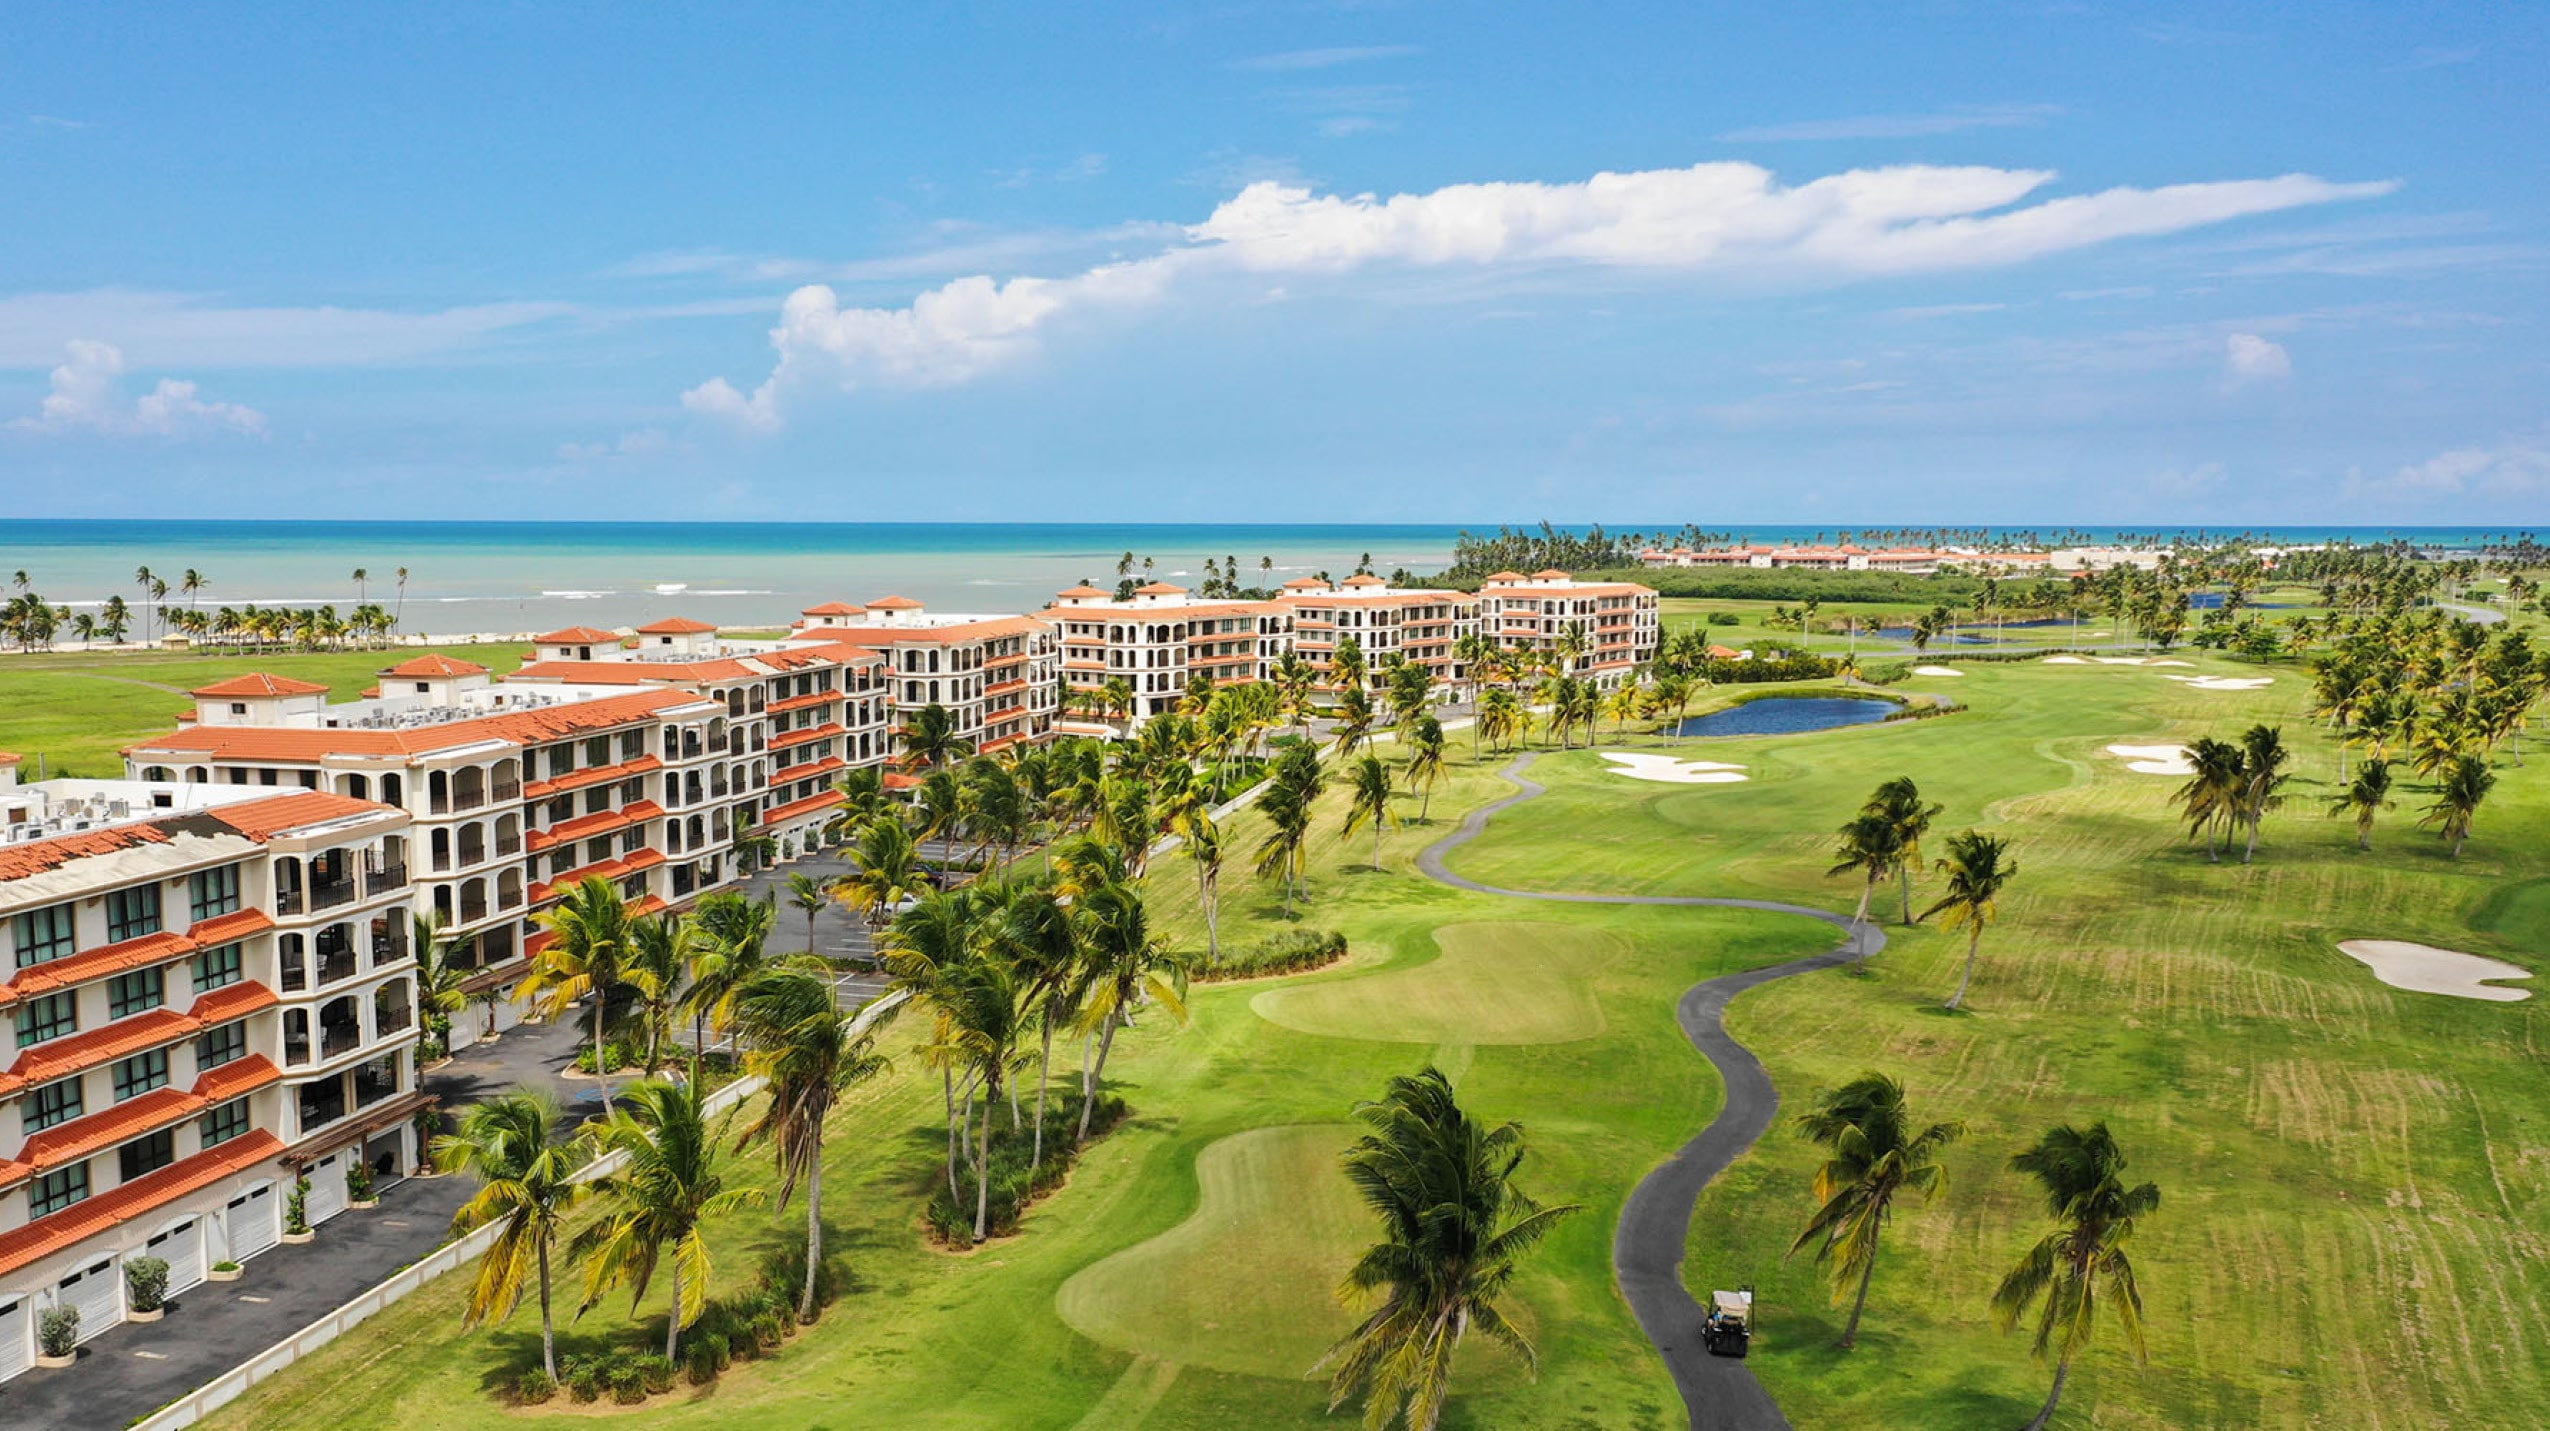 Aerial perspective of the Celeste Country Club Residences resort complex, highlighting The Club Celeste's distinctive architecture, manicured greens, and proximity to the beach.